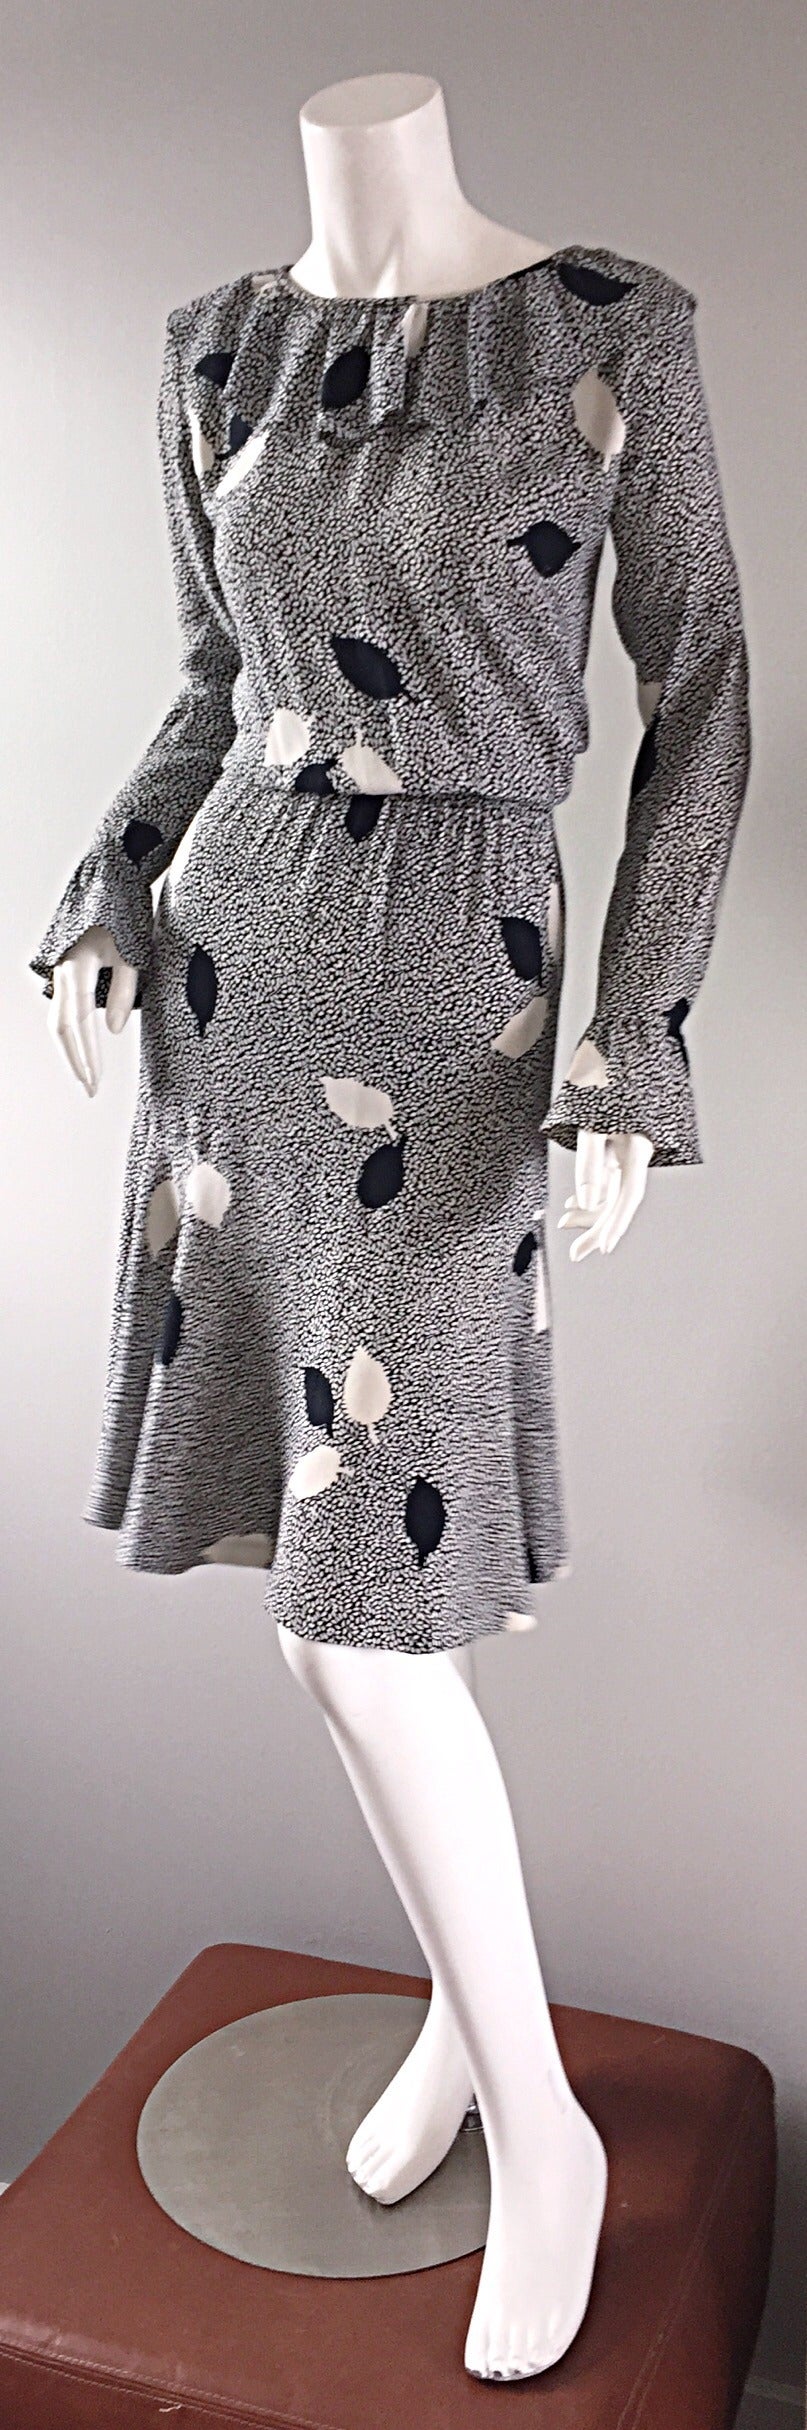 Vintage Yves Saint Laurent 1980s ' Rive Gauche ' Black + White Leaf Dress & Sash In Excellent Condition For Sale In San Diego, CA